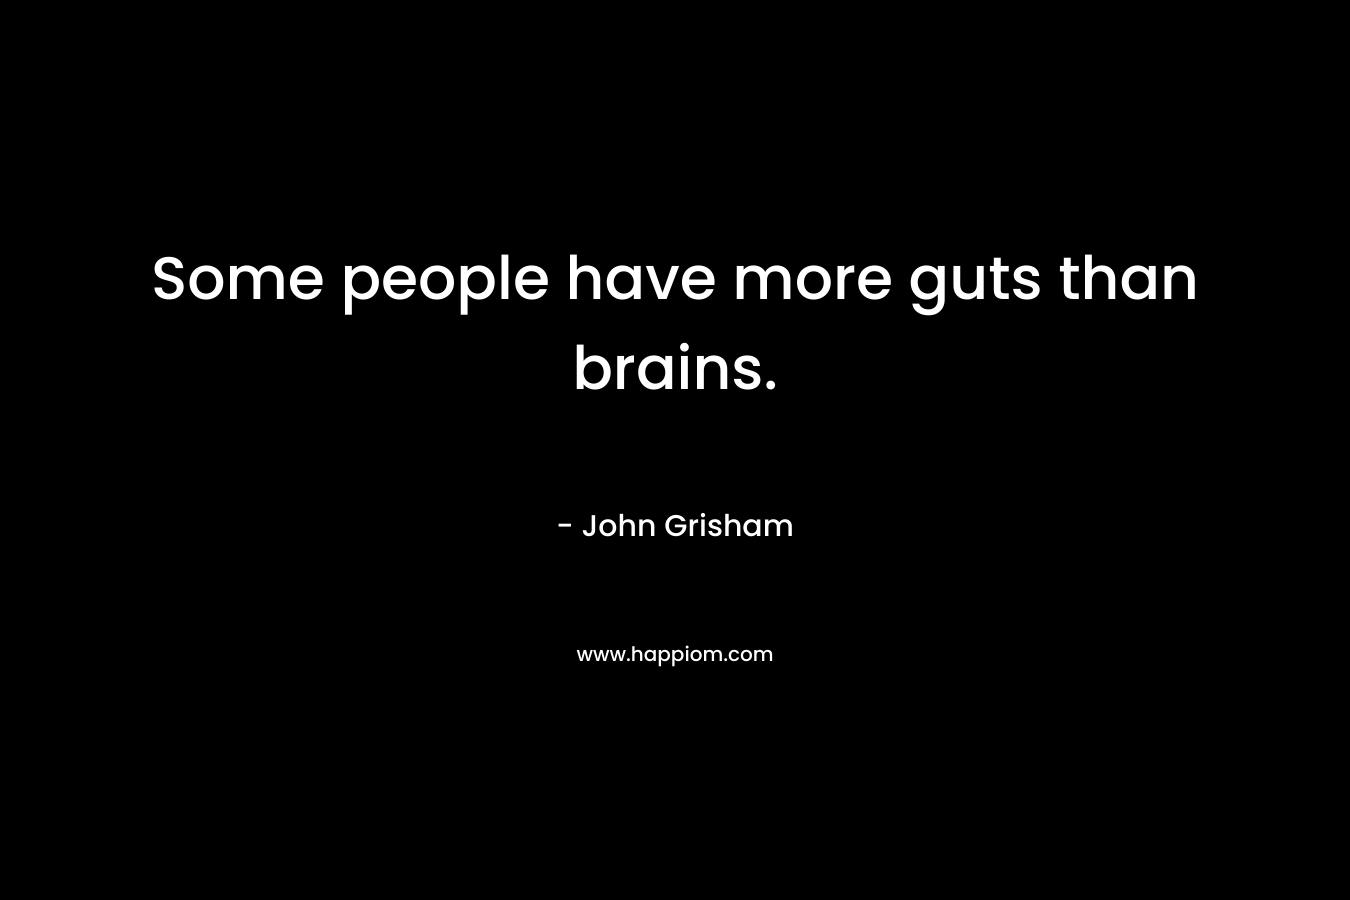 Some people have more guts than brains.